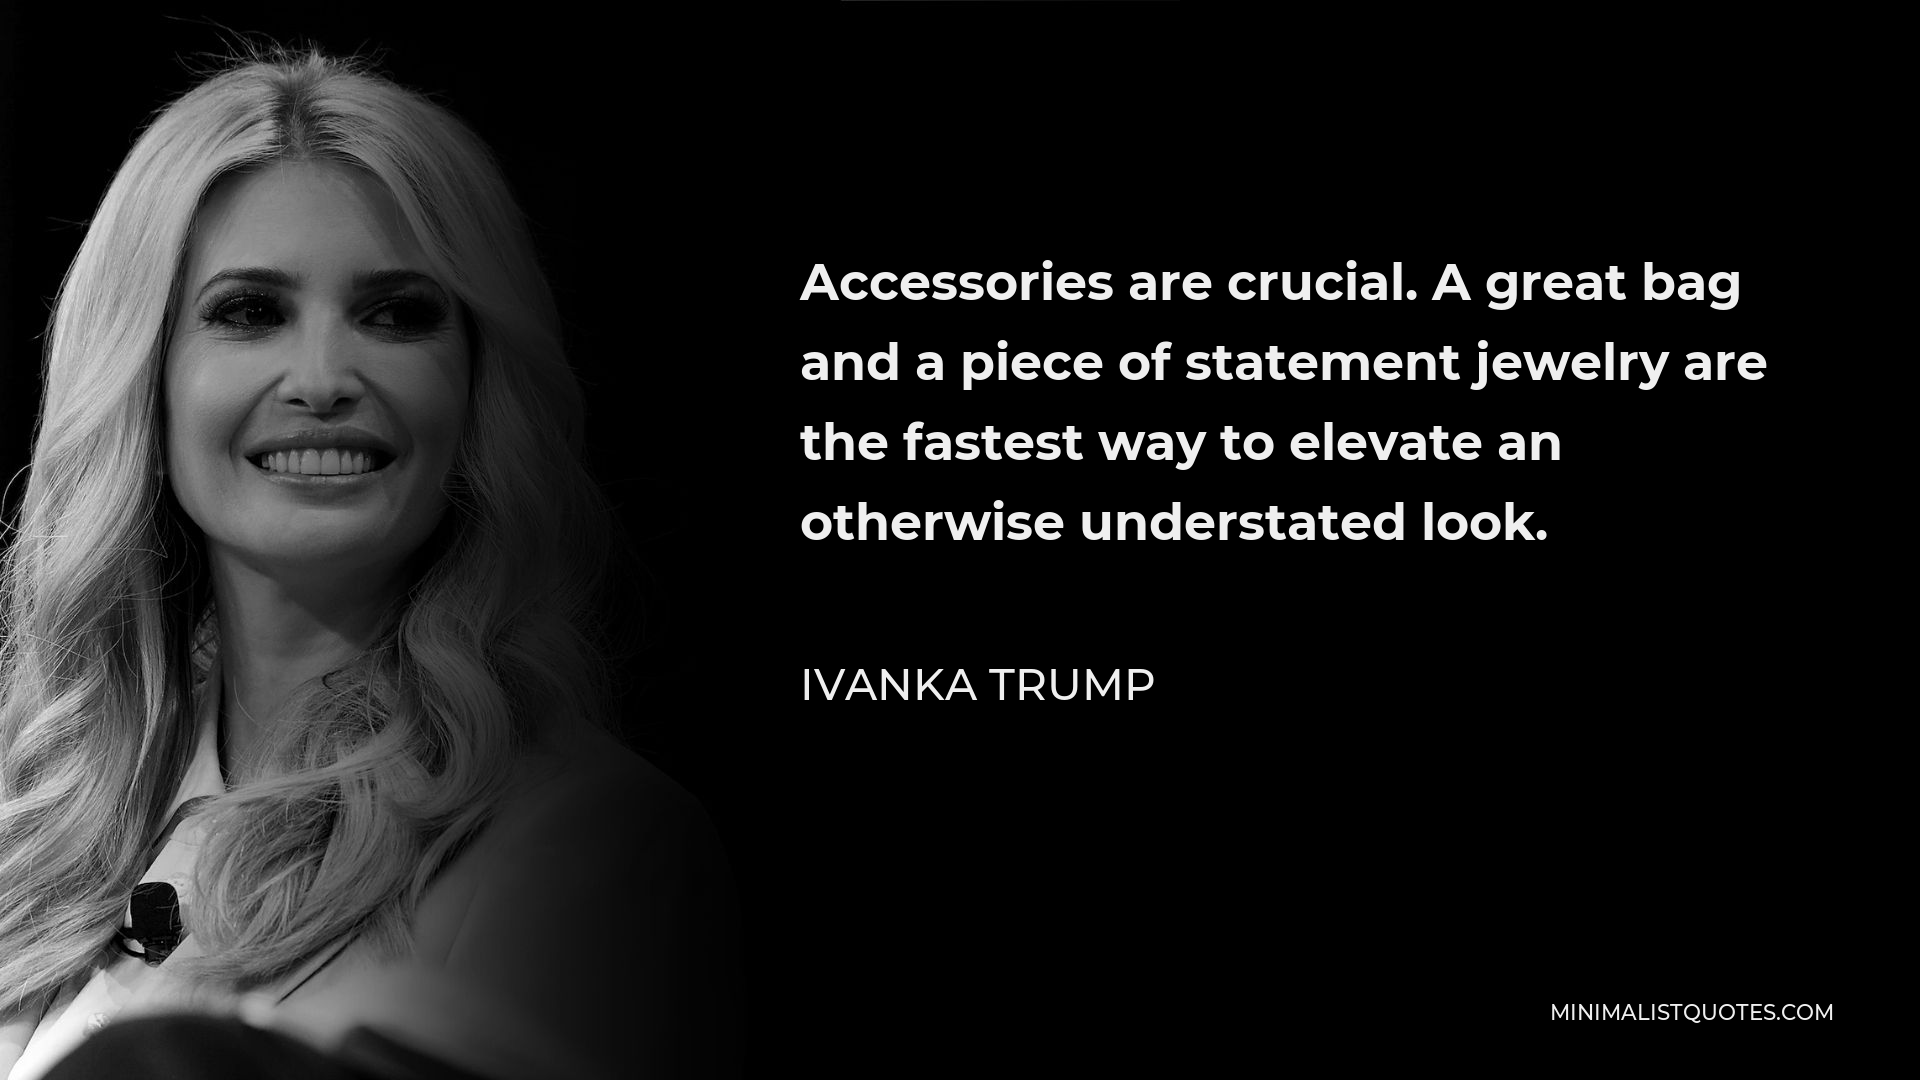 Ivanka Trump Quote - Accessories are crucial. A great bag and a piece of statement jewelry are the fastest way to elevate an otherwise understated look.